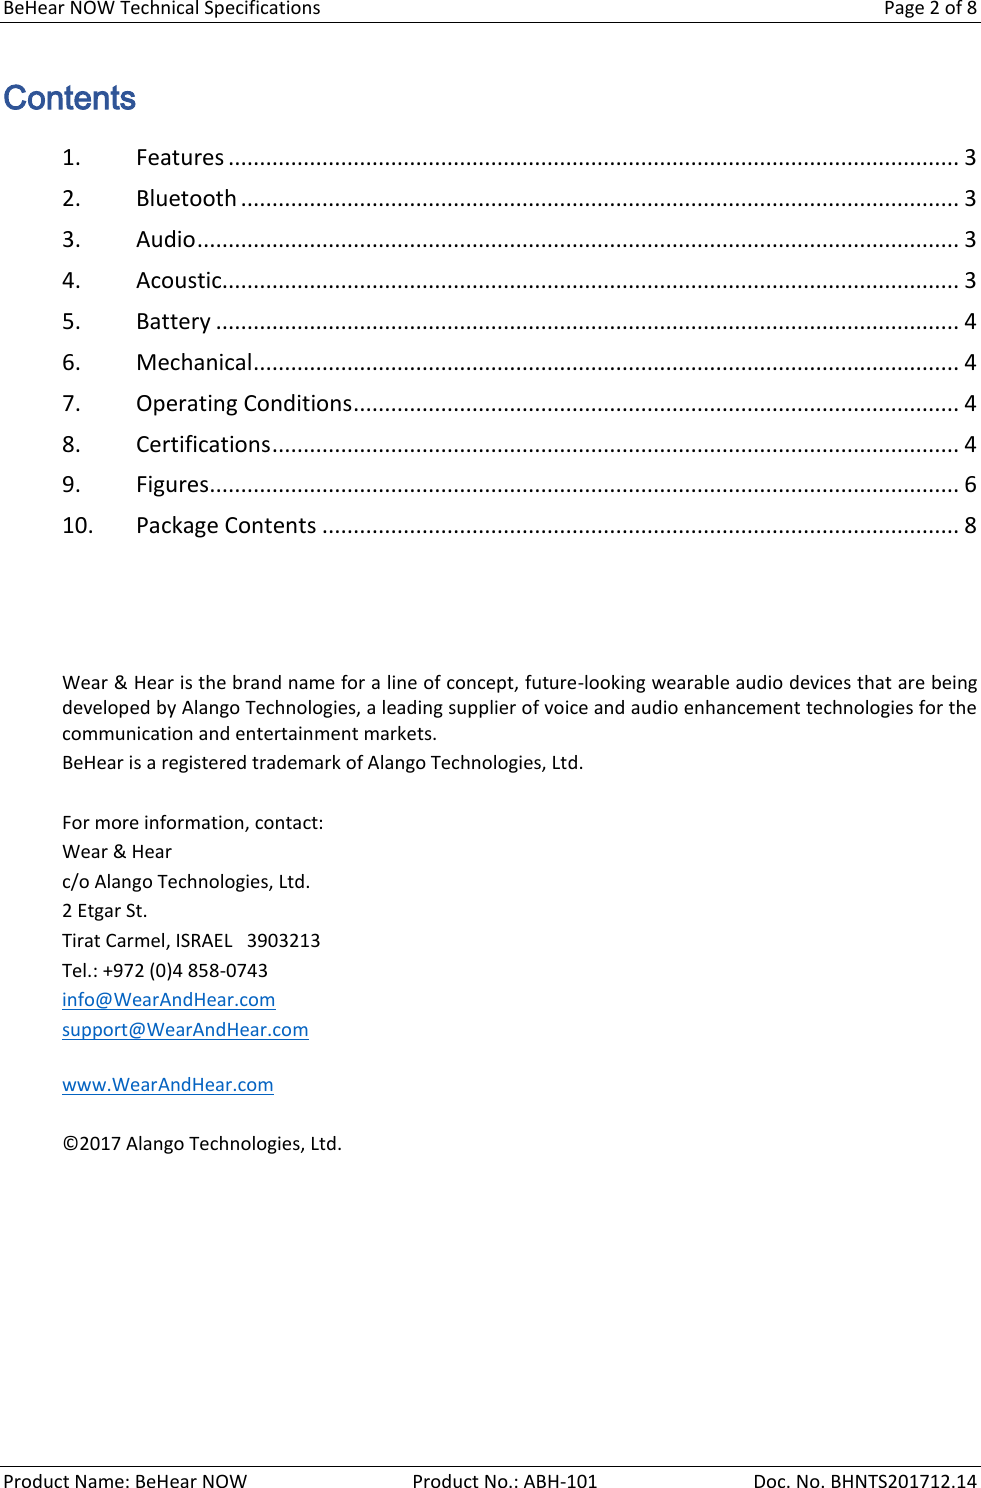 Page 2 of ALANGO TECHNOLOGIES ABH-101 Bluetooth Headset User Manual BeHear NOW Technical Specifications